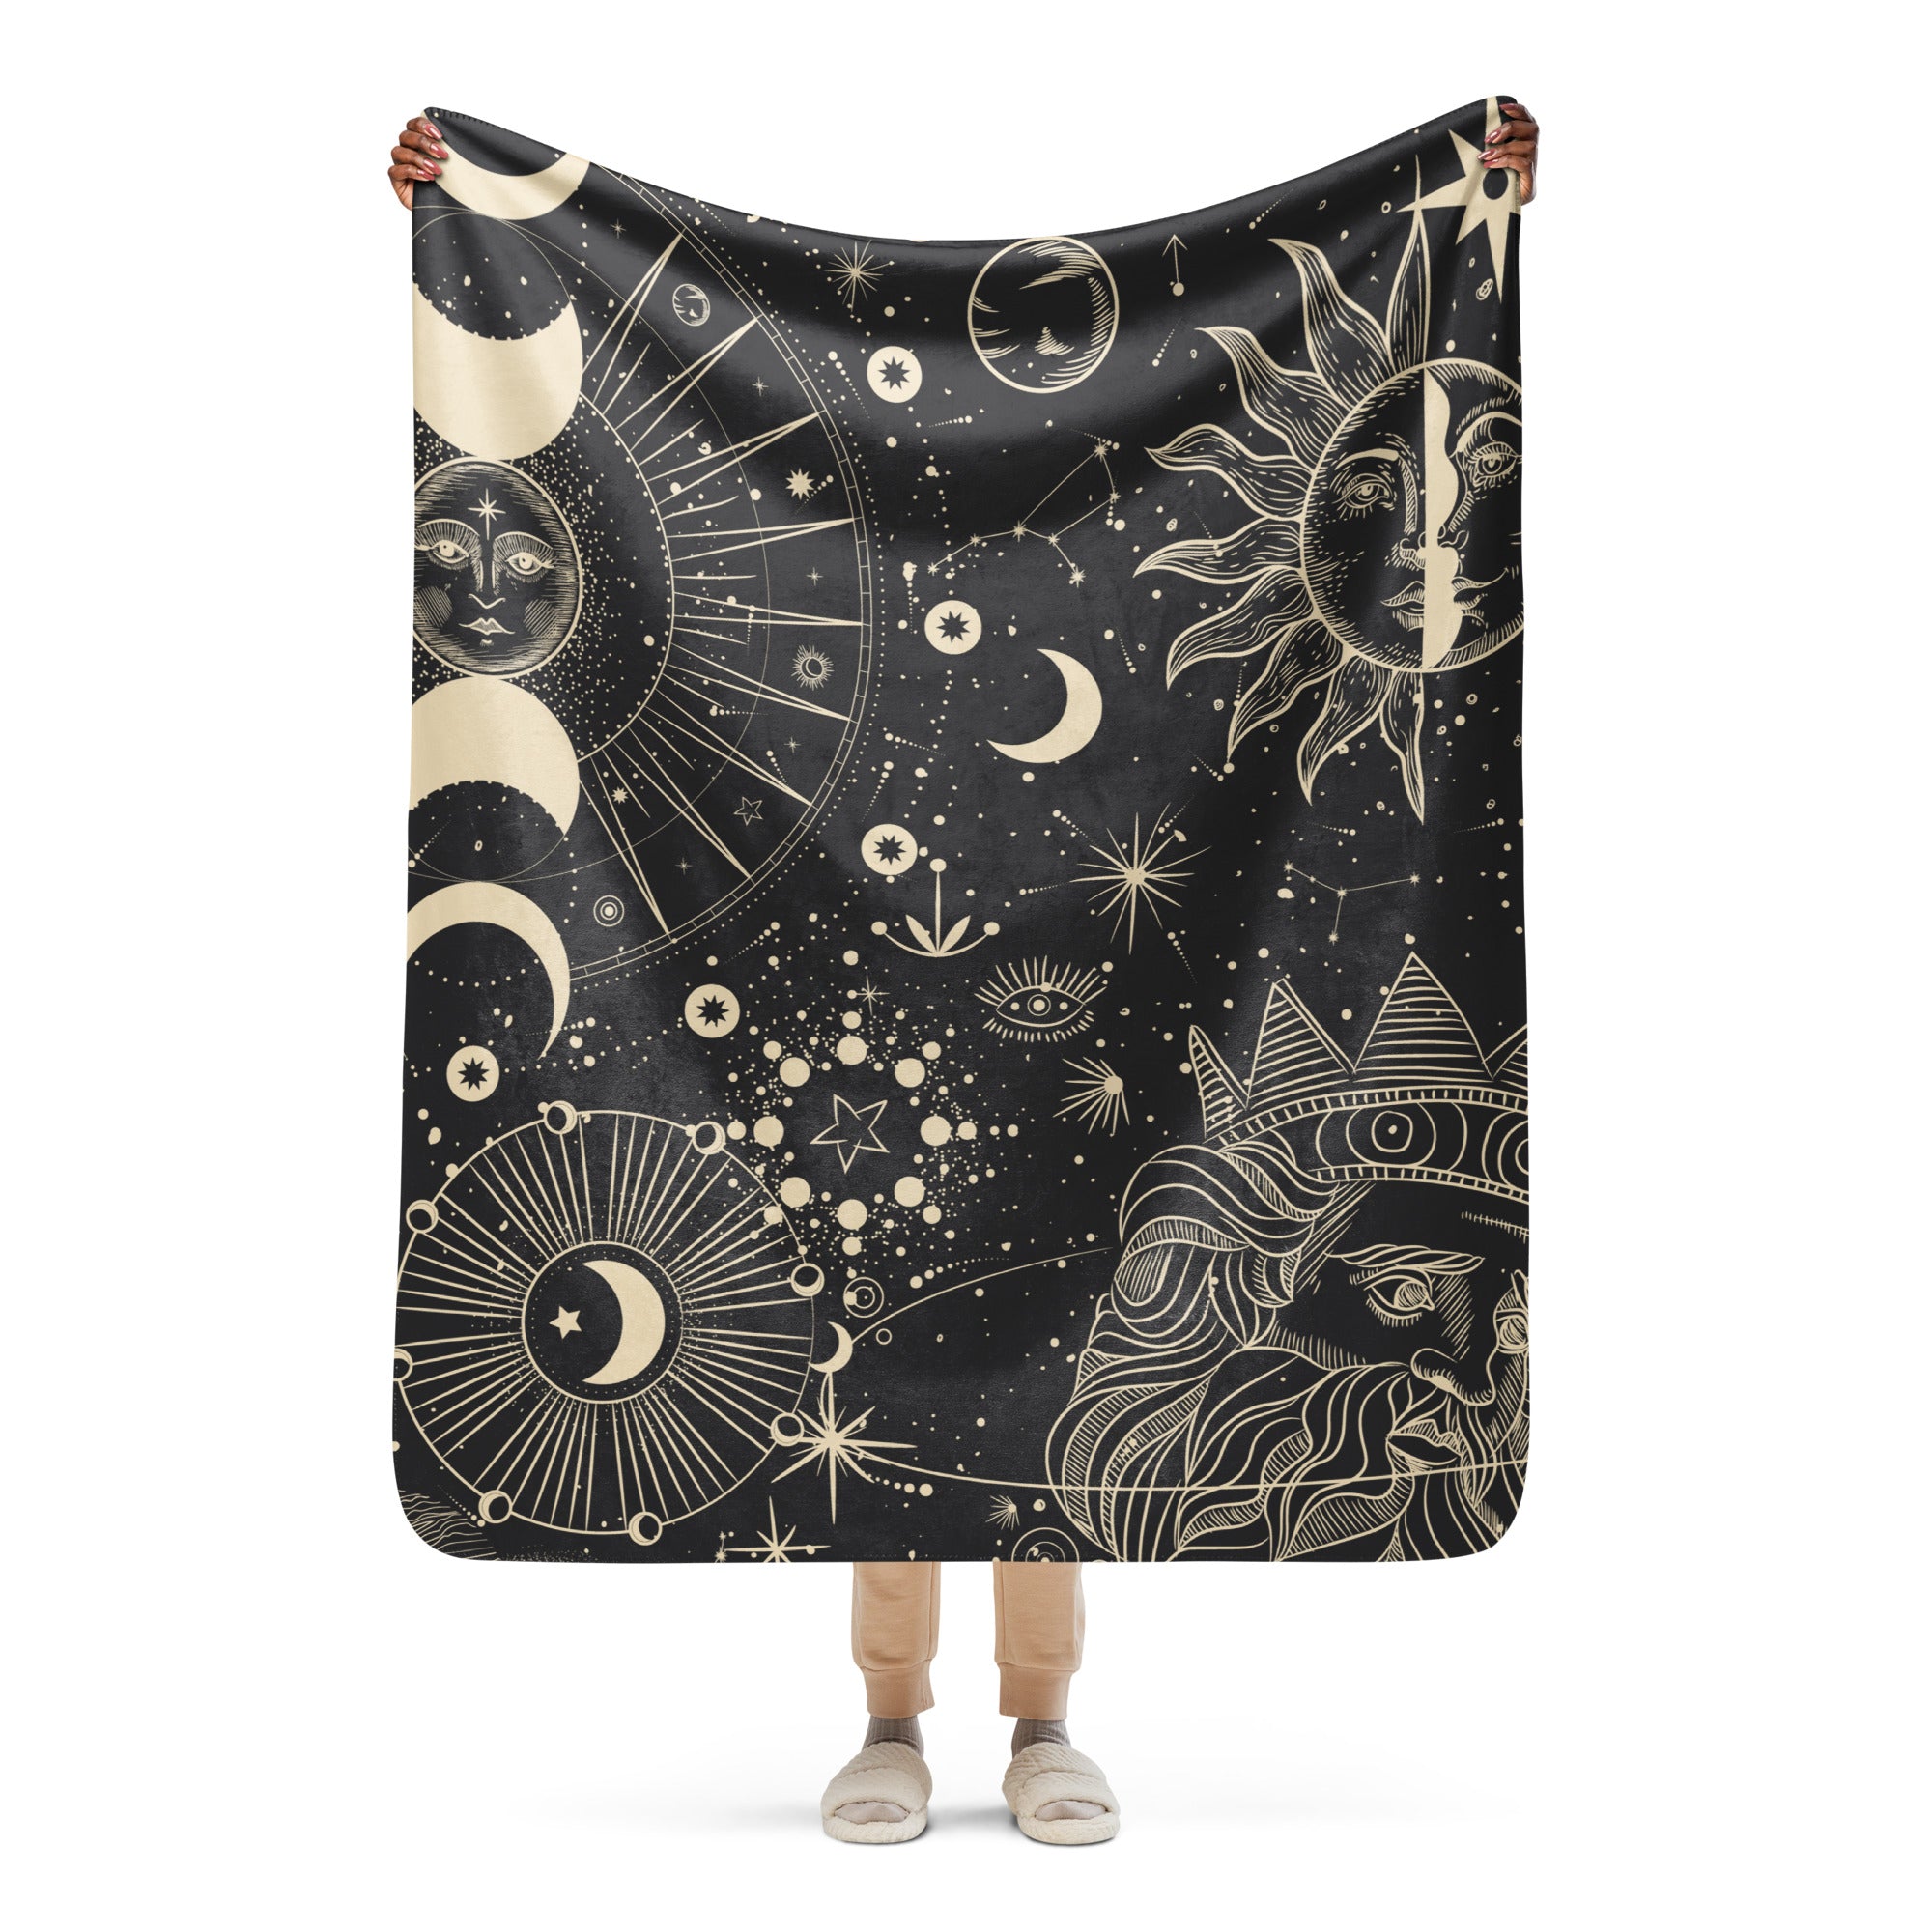 Astronomy Sherpa blanket lioness-love